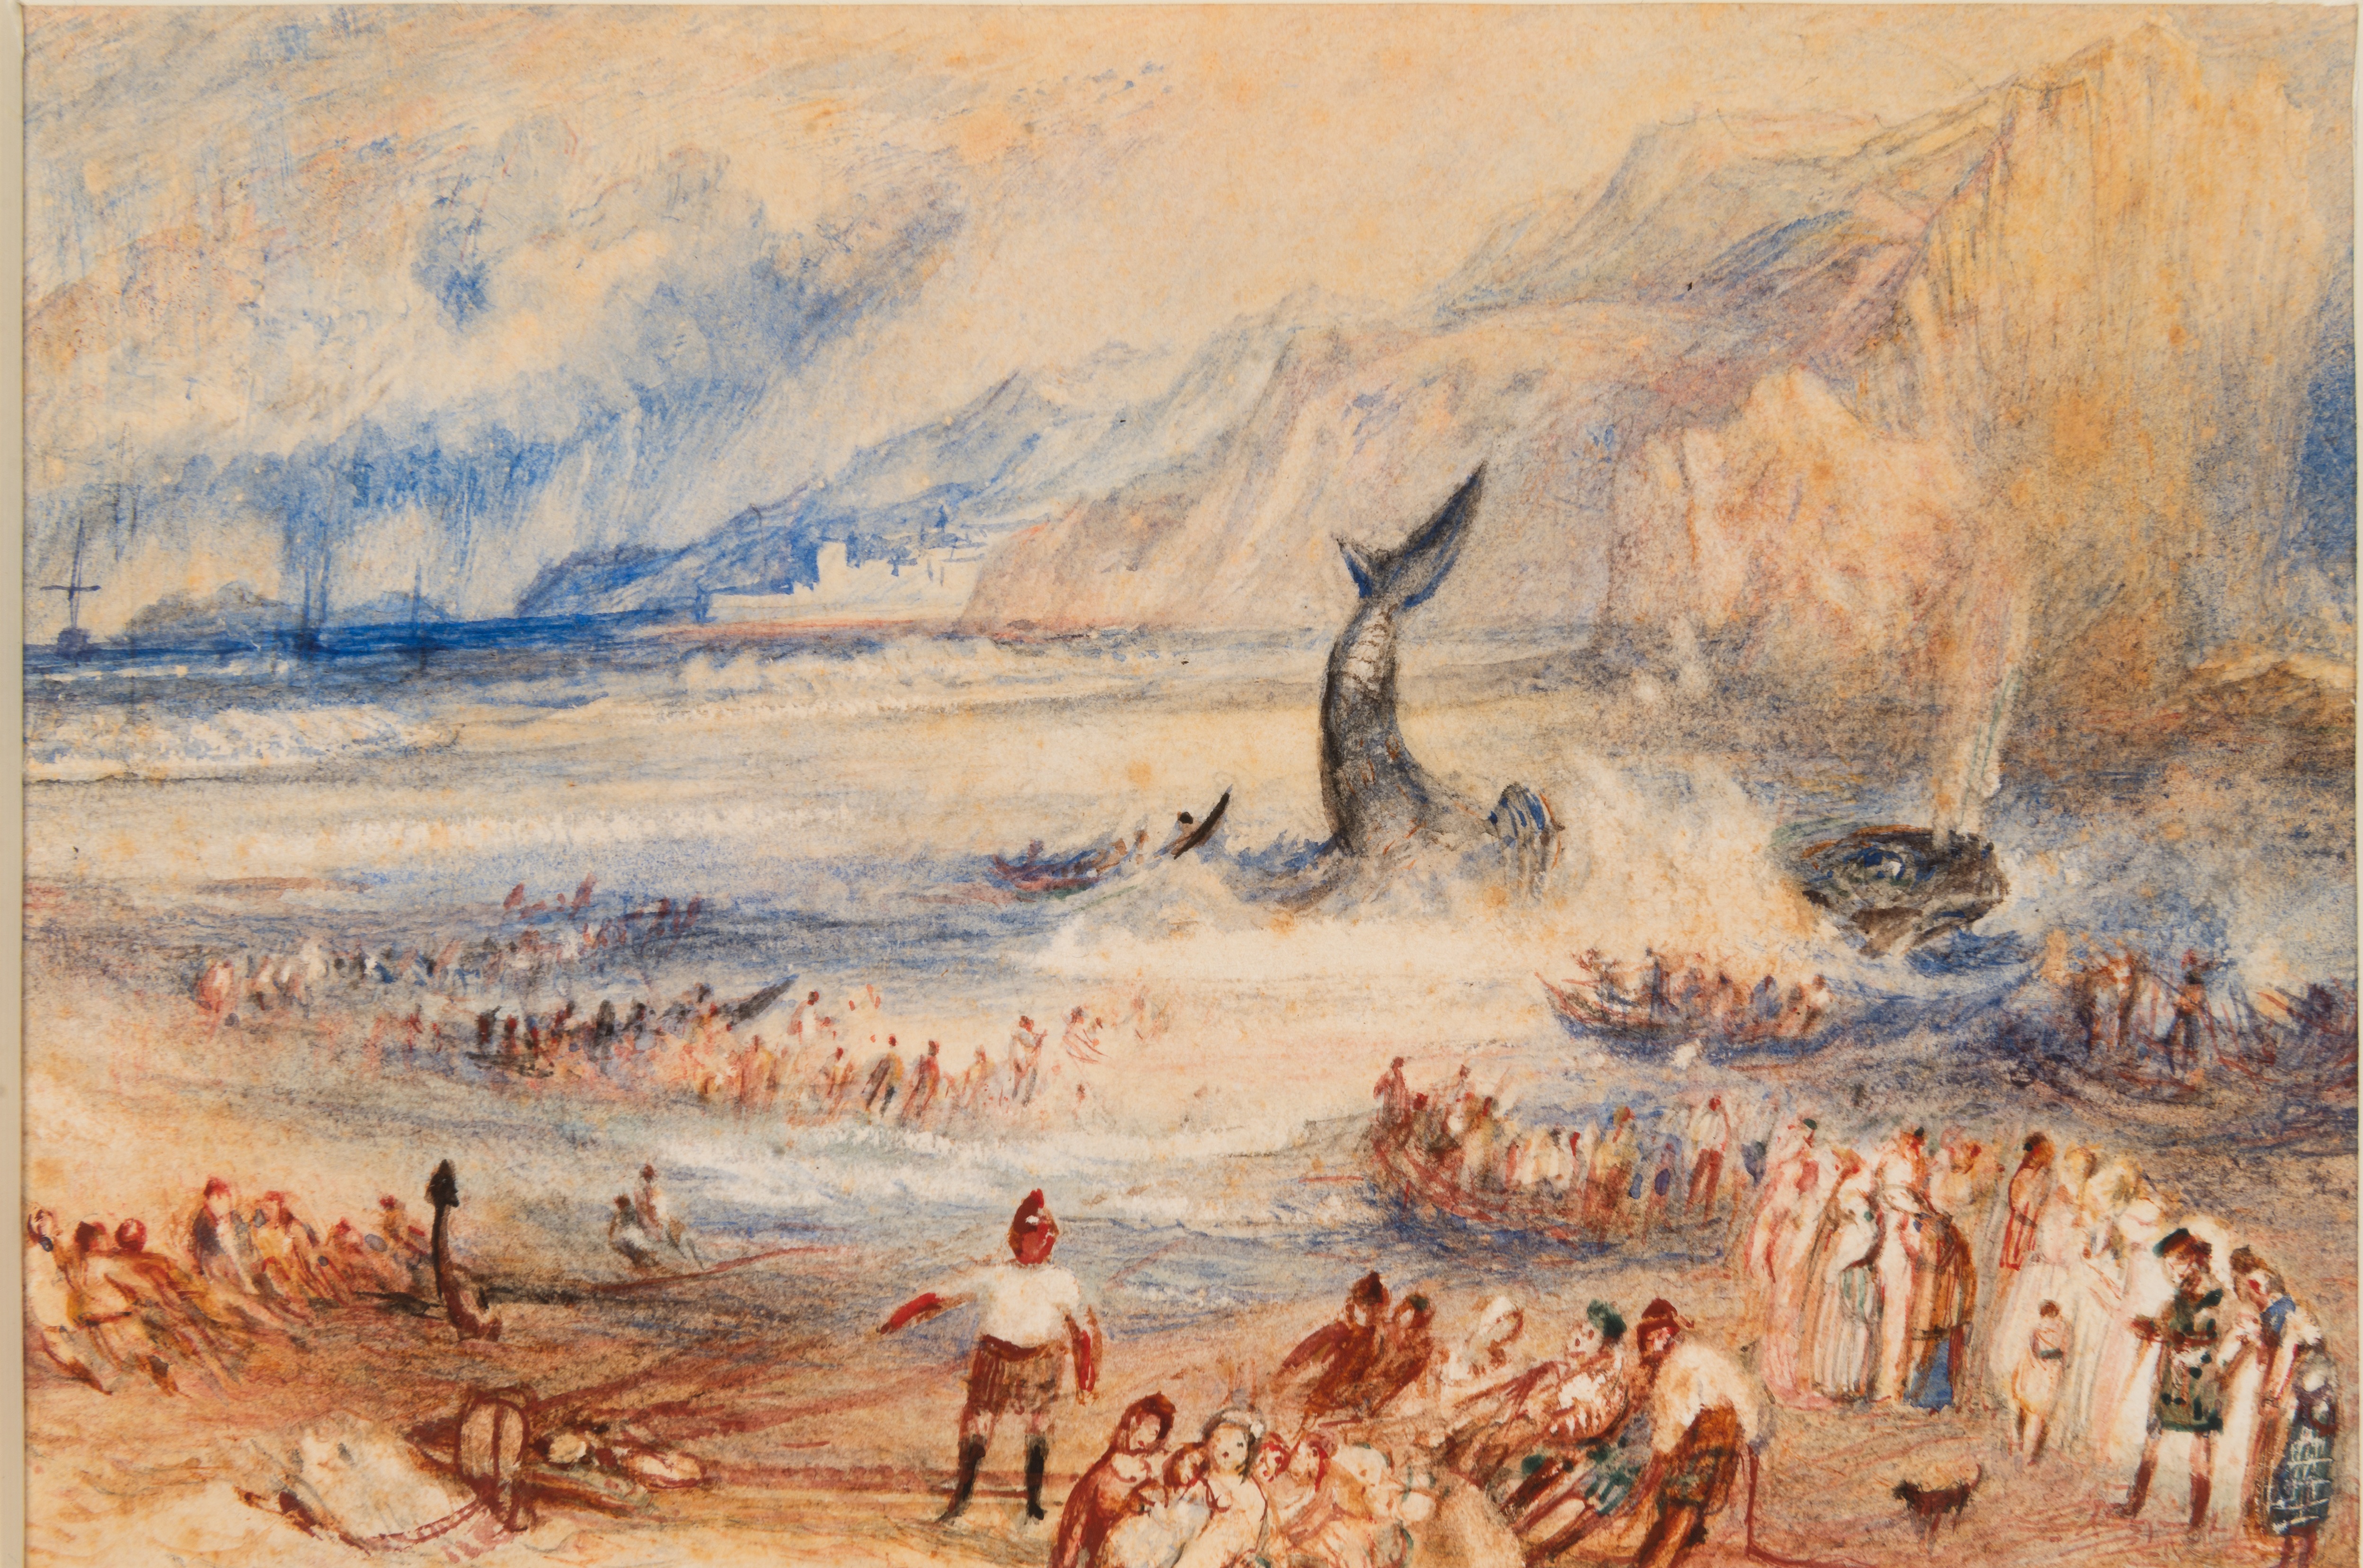 "The Whale on Shore," watercolor on paper, 1837 (Courtesy of The Met)